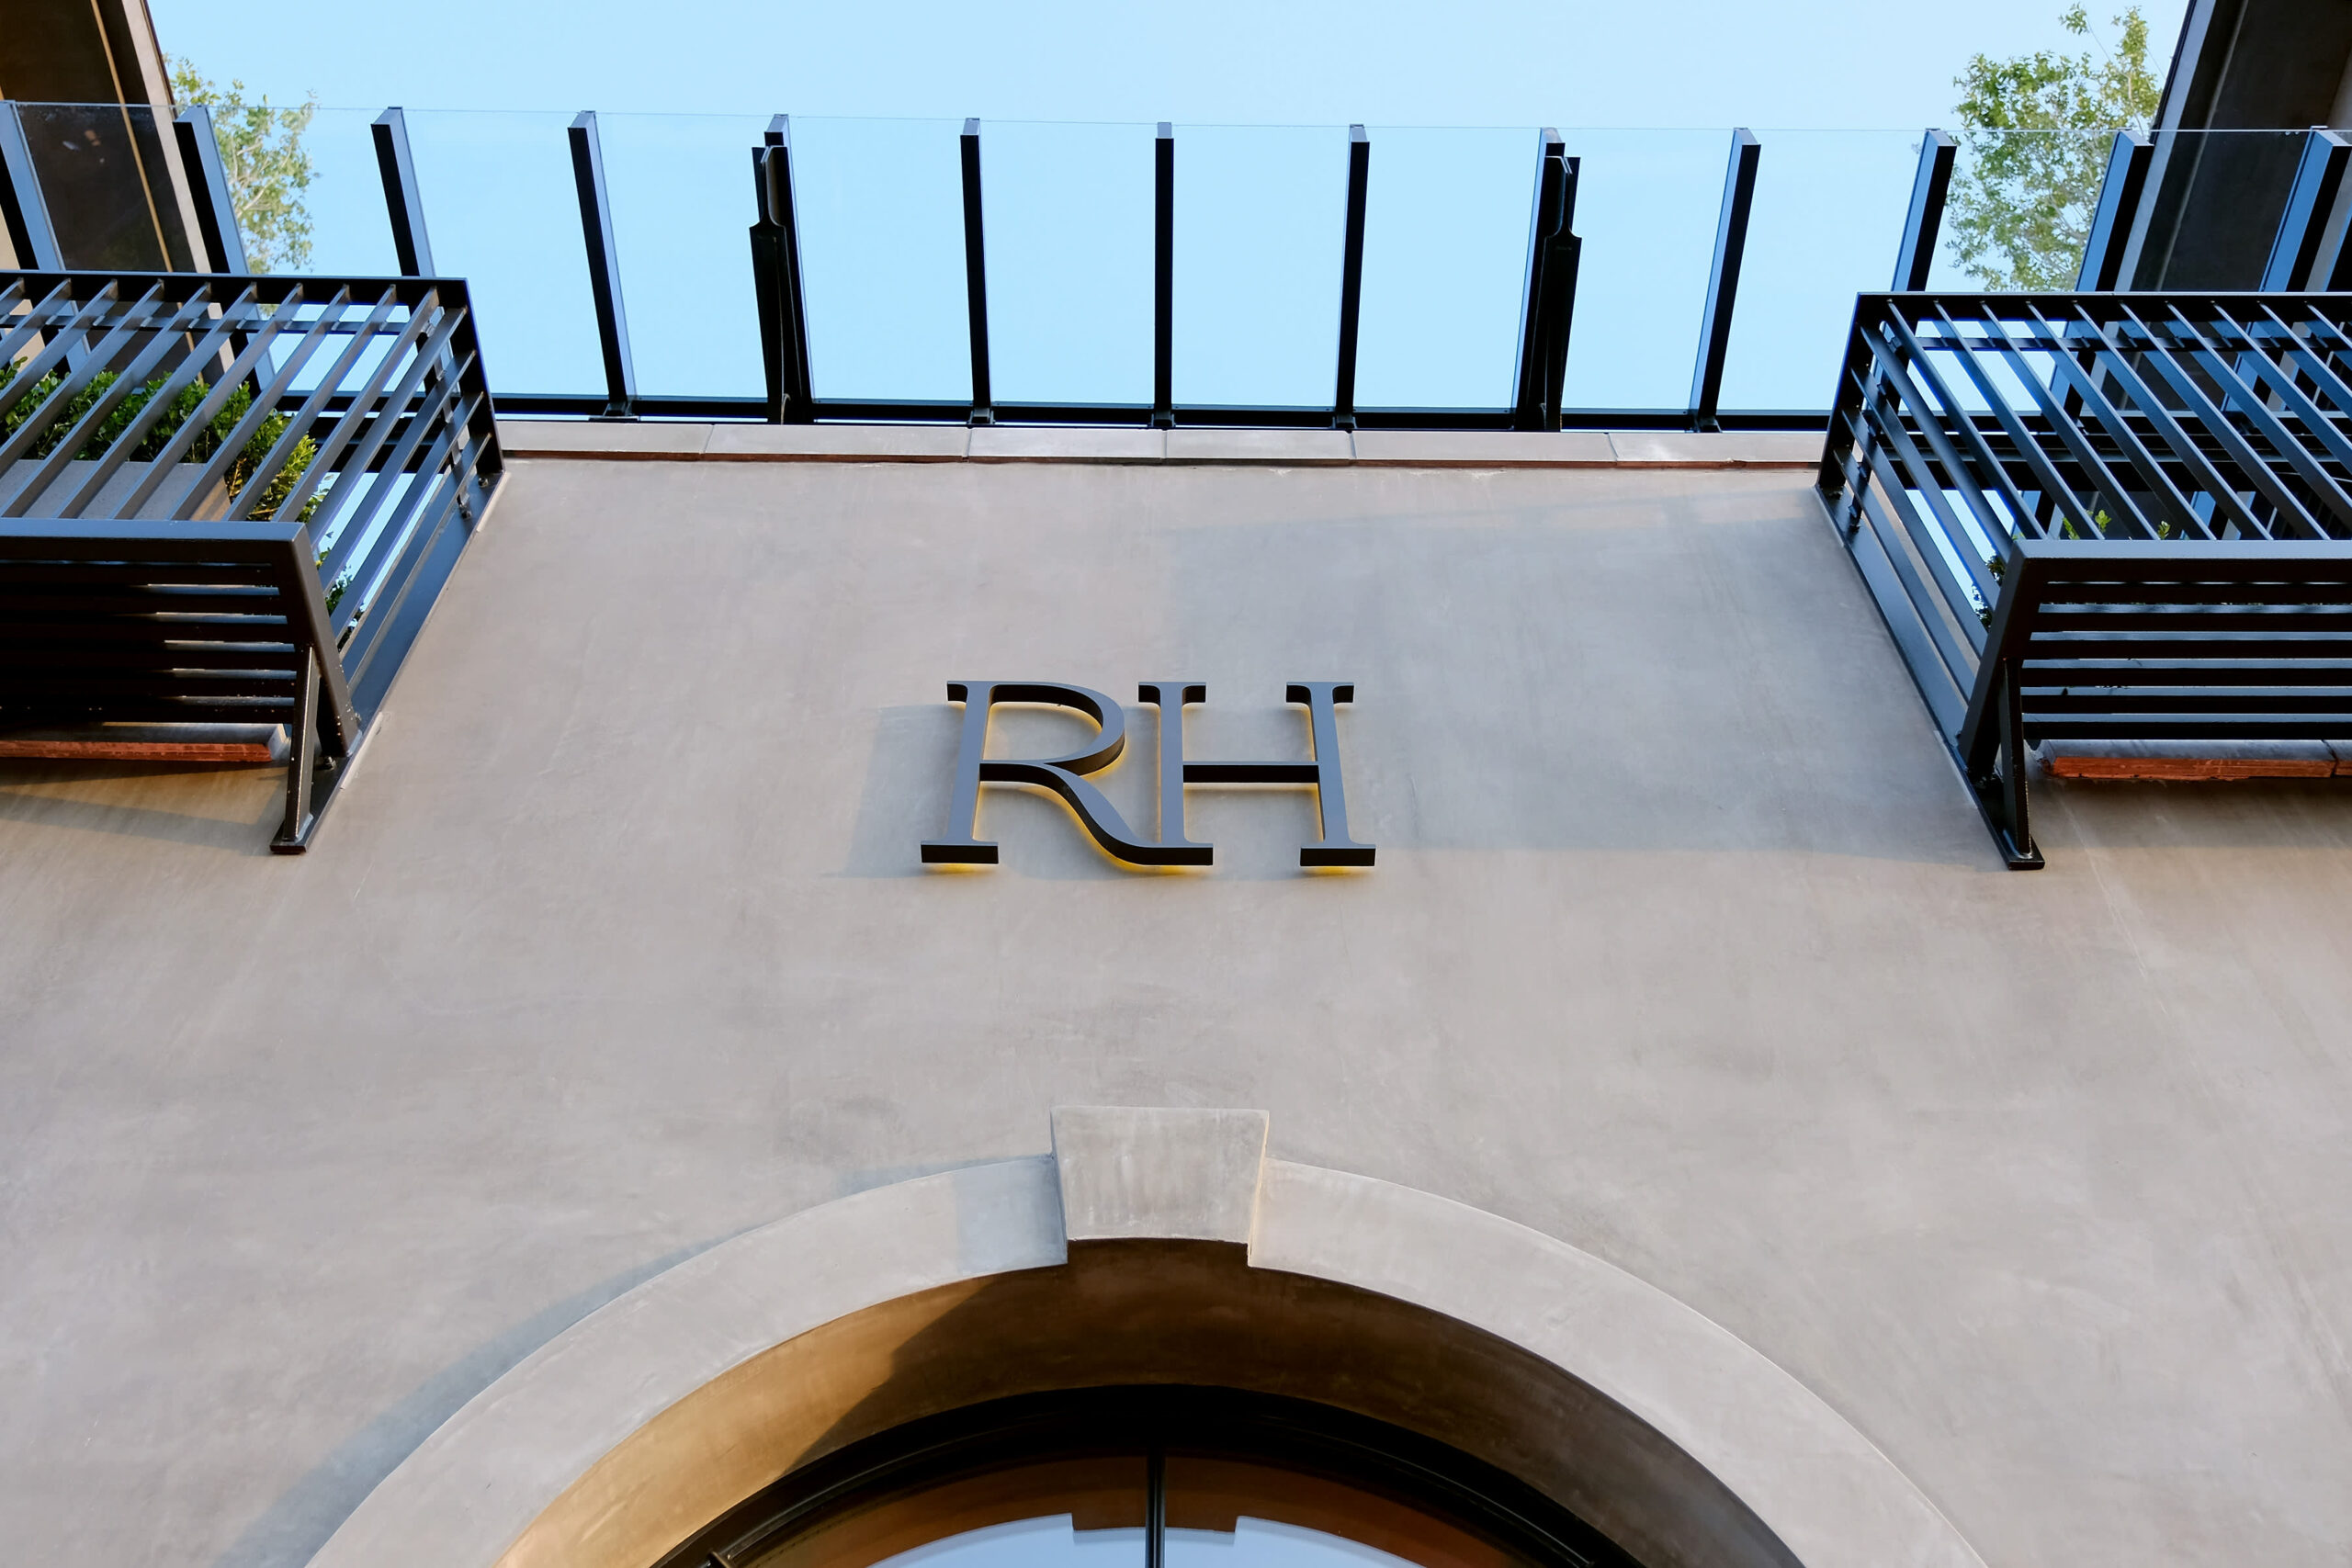 RH (RH) This fall 2020 earnings outcomes